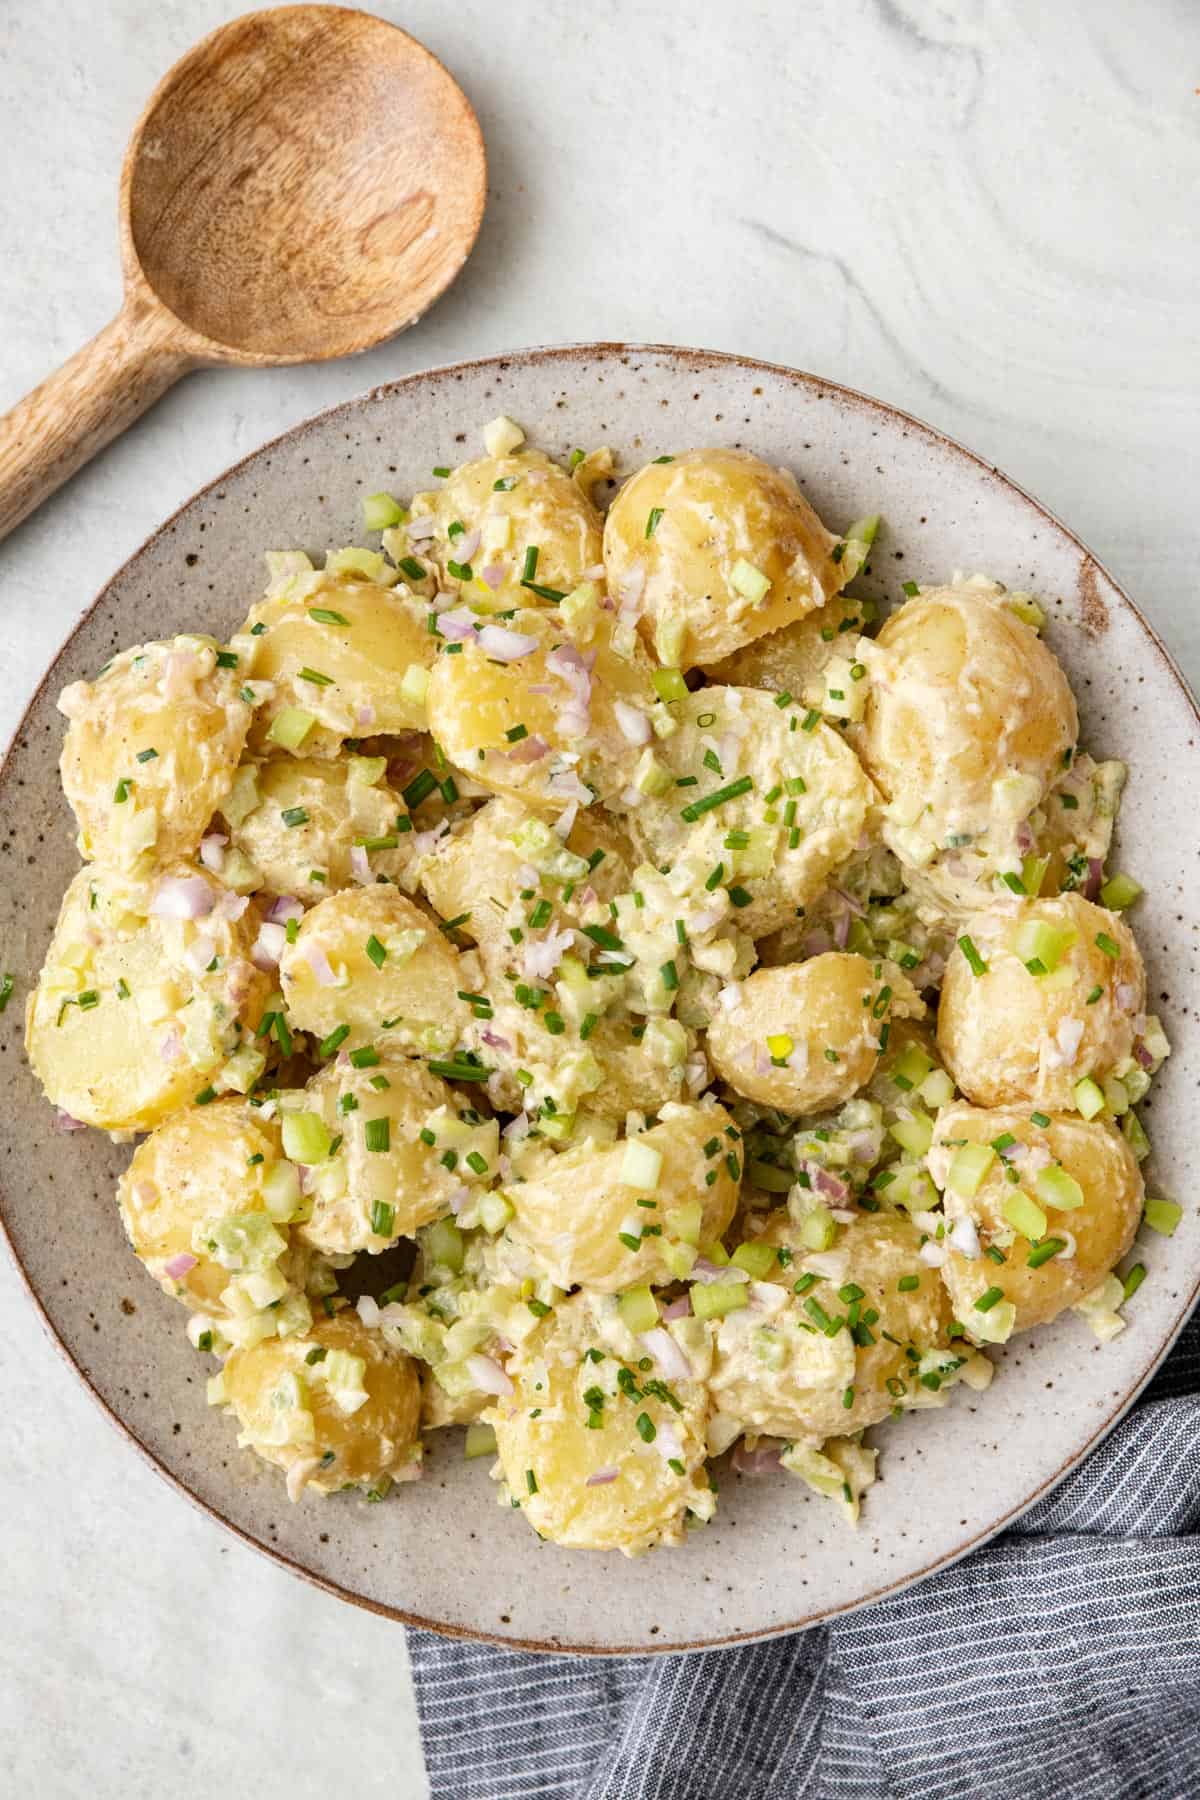 Mustard potato salad in a large shallow serving bowl with a wooden spoon nearby.